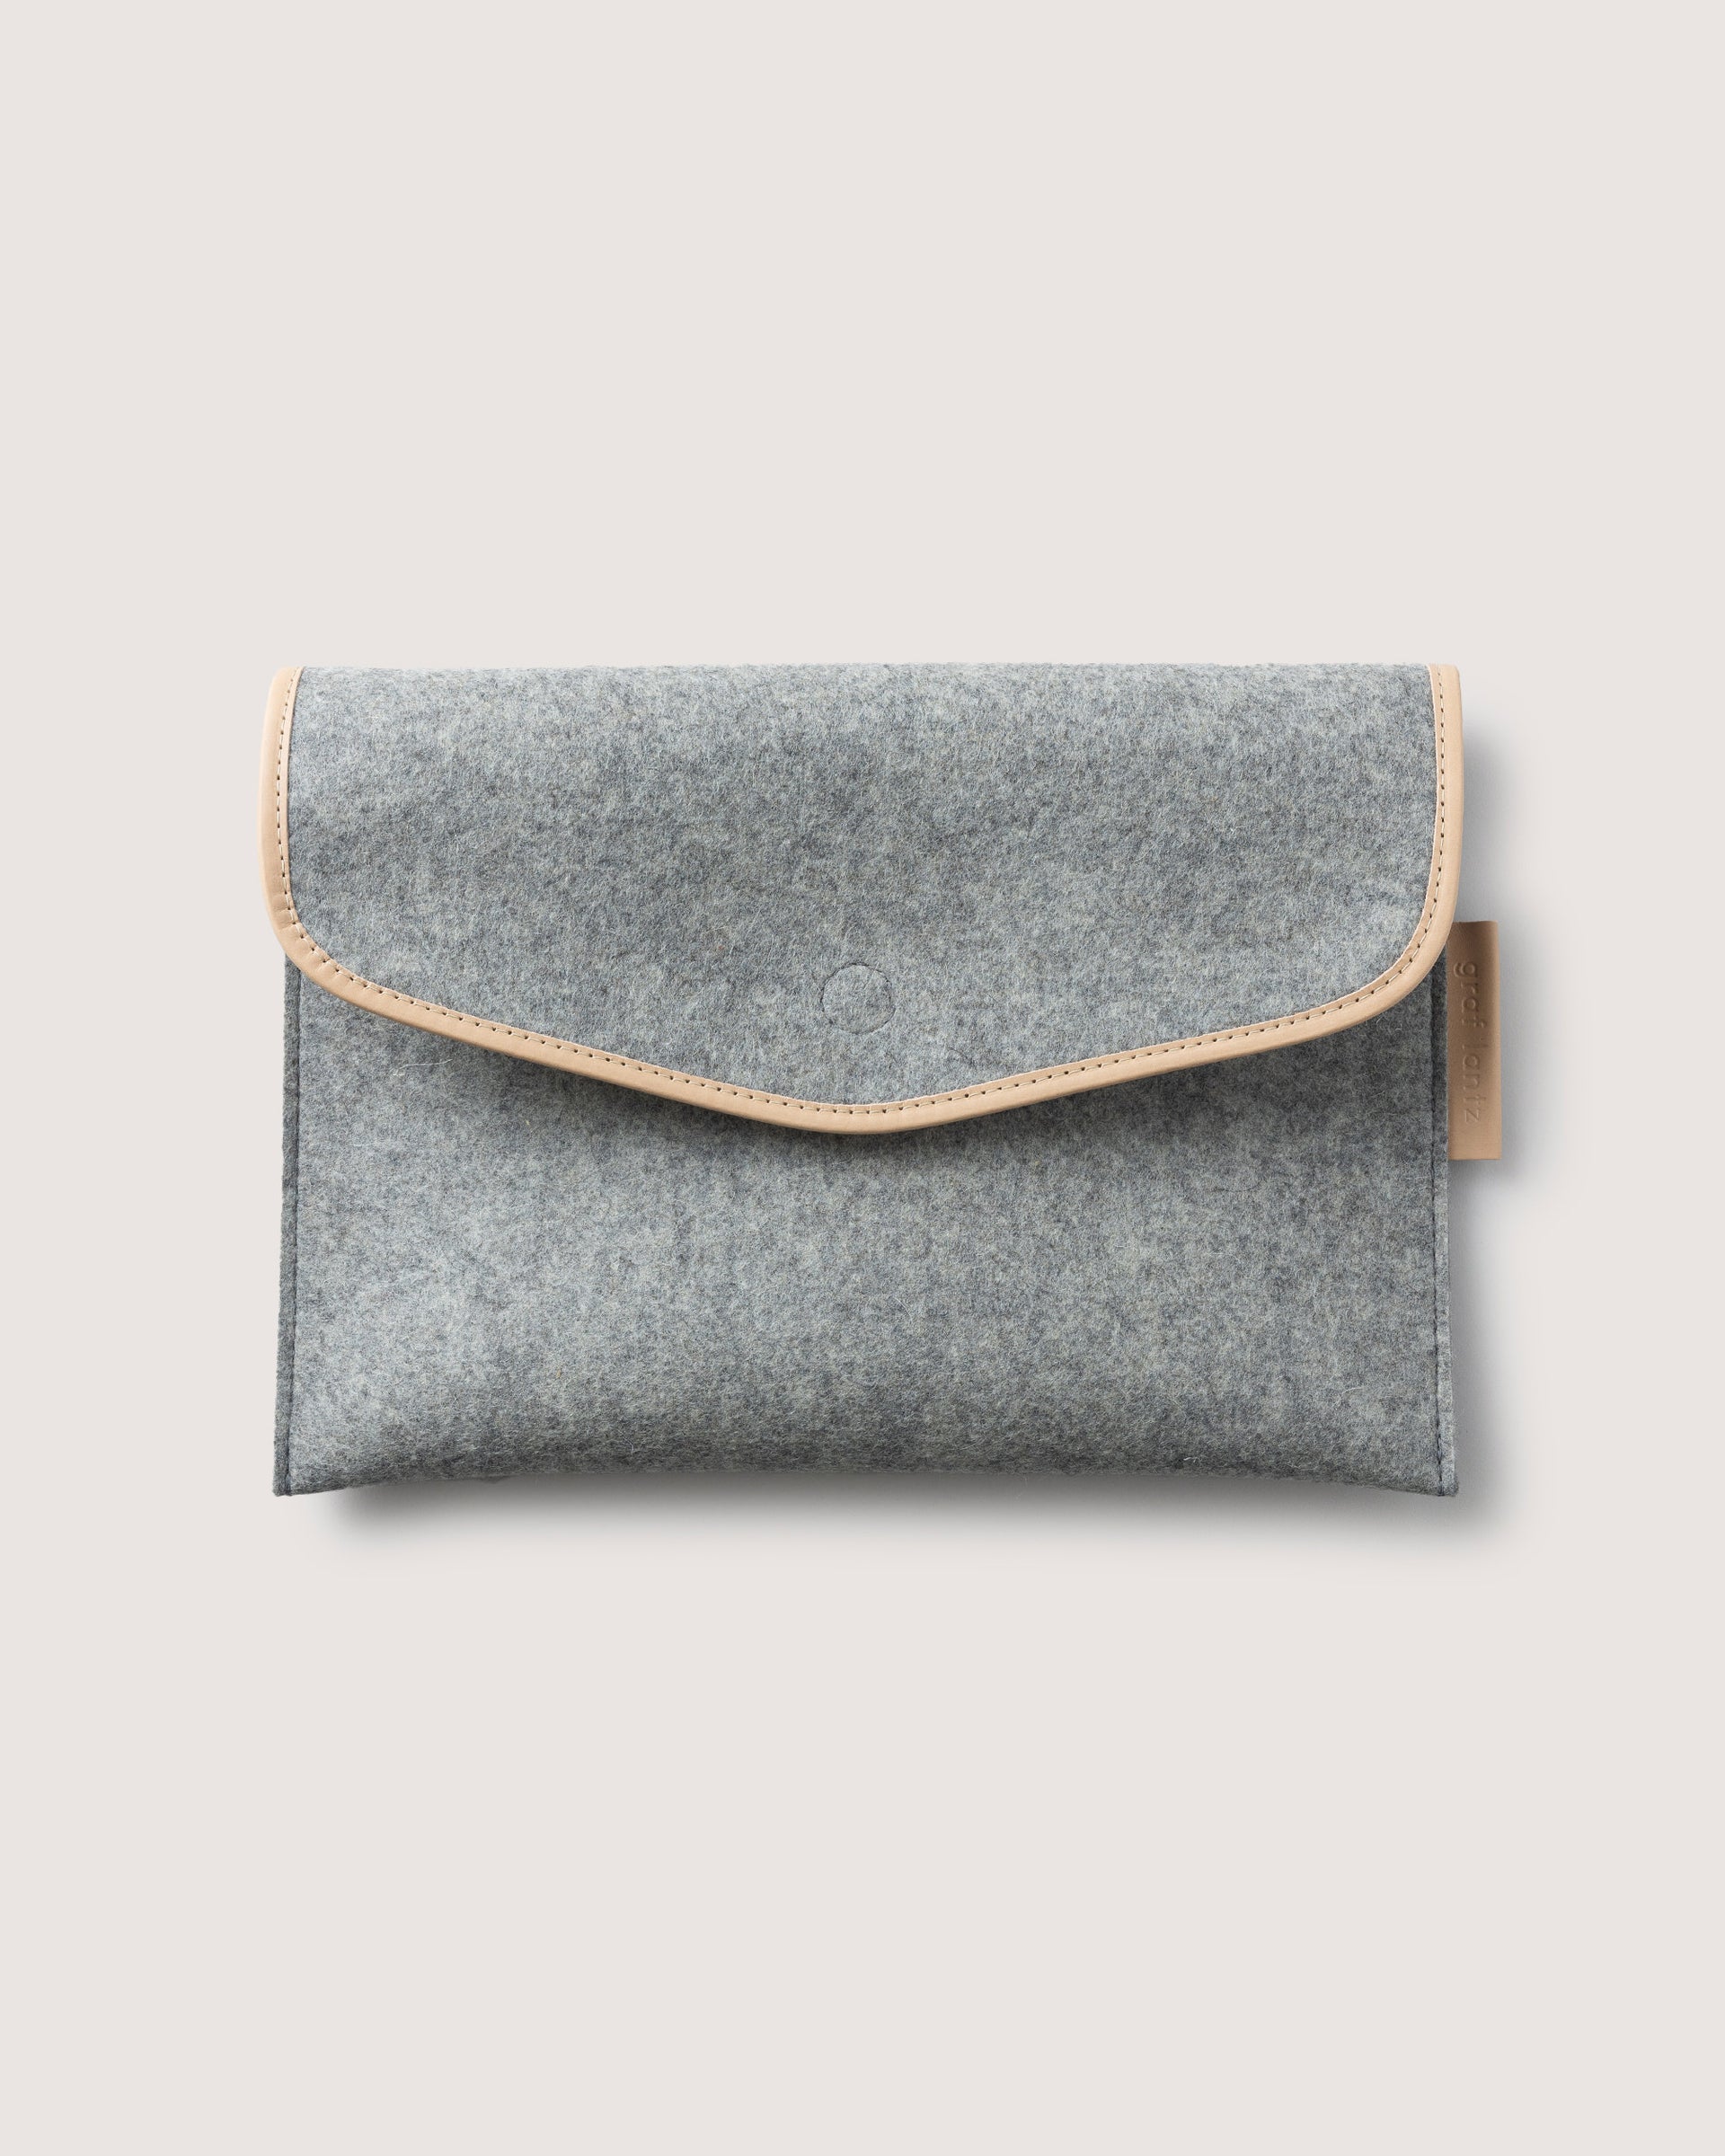 Our elegant 14 inch laptop sleeve. Here in granite color